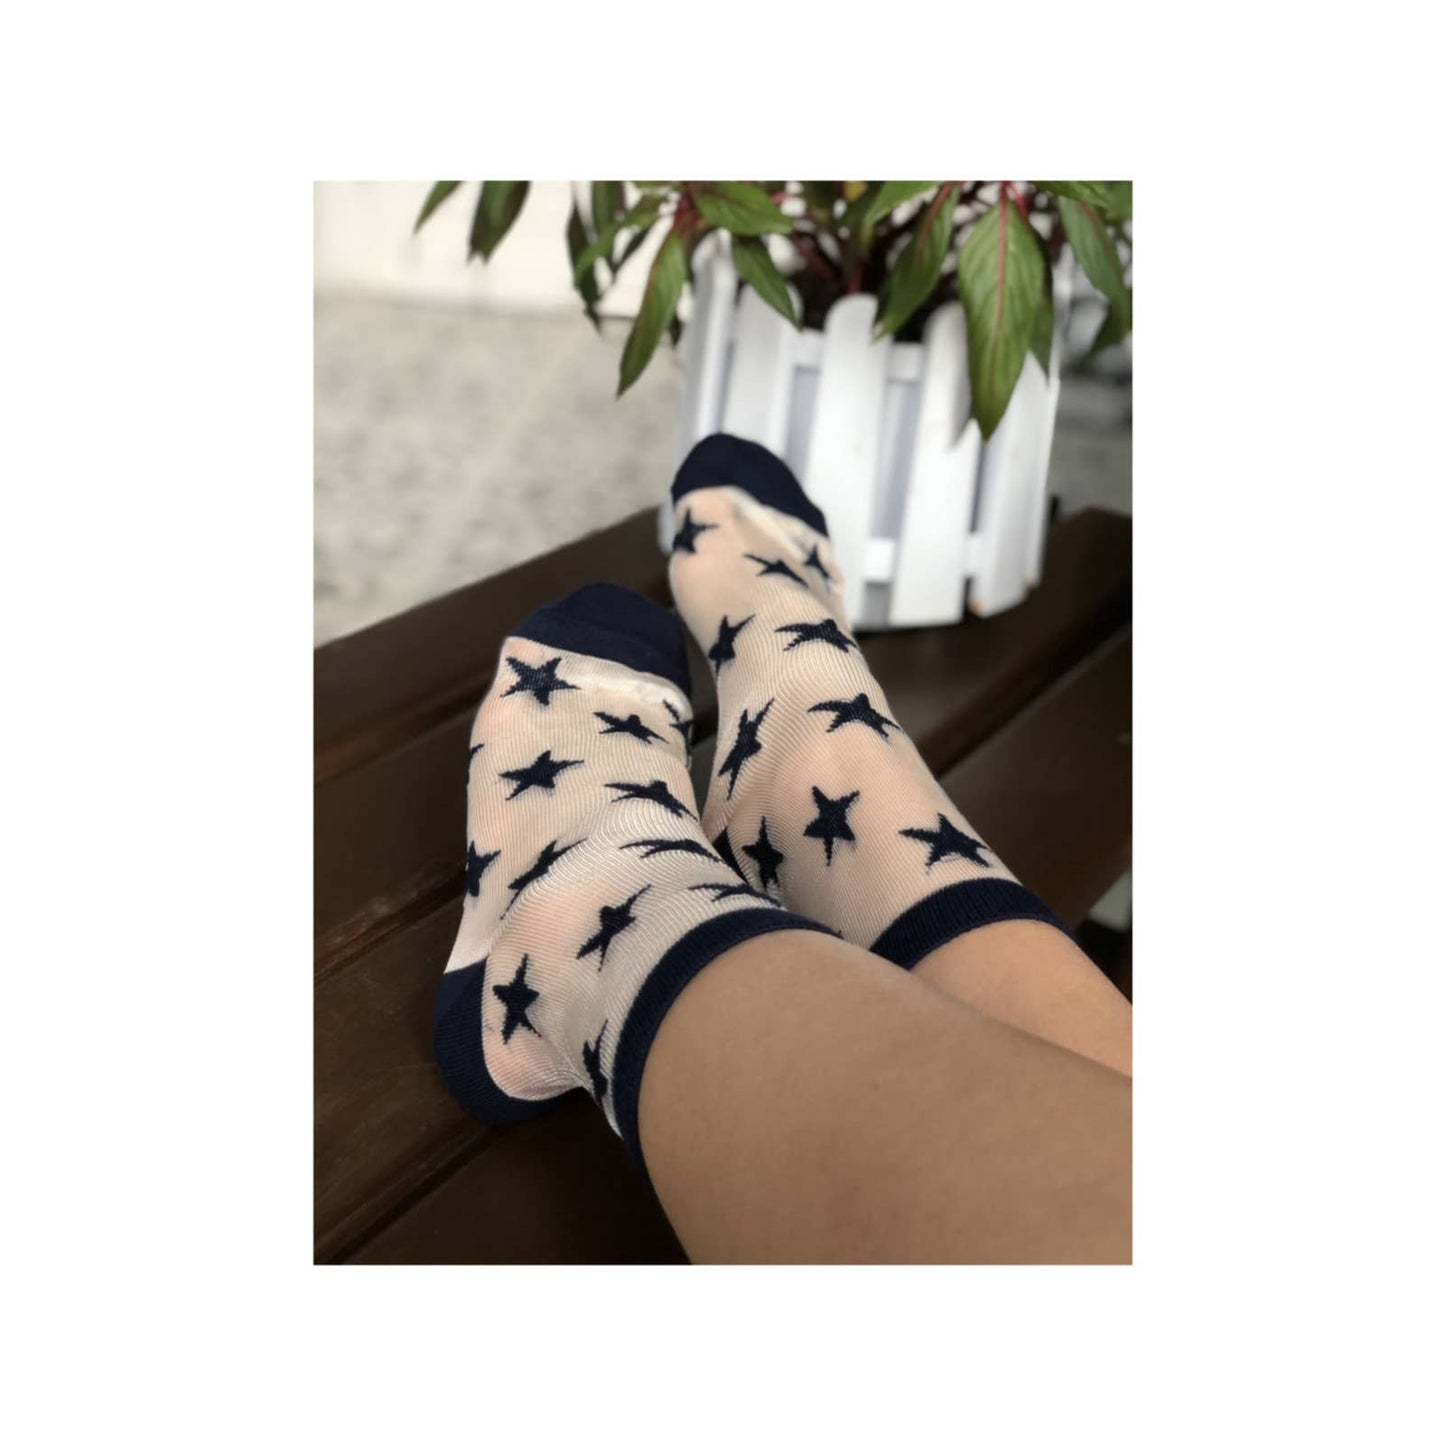 navy color stars women sheer socks, featuring a stylish and elegant design with star patterns for a chic look.